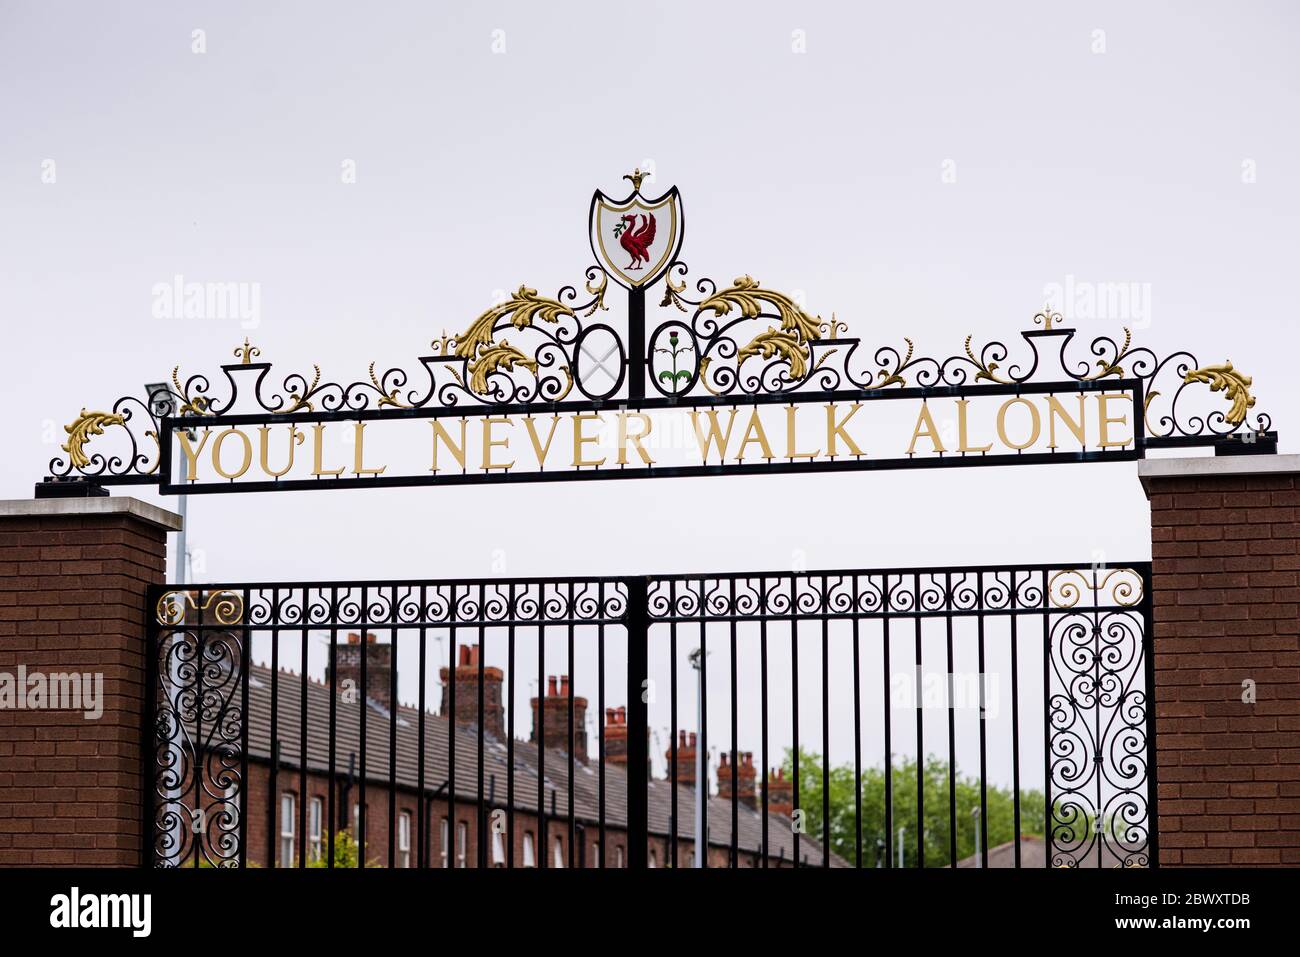 You'll Never Walk Alone. Bill Shankly Memorial Gate. Anfield, Liverpool, United Kingdom. Stock Photo